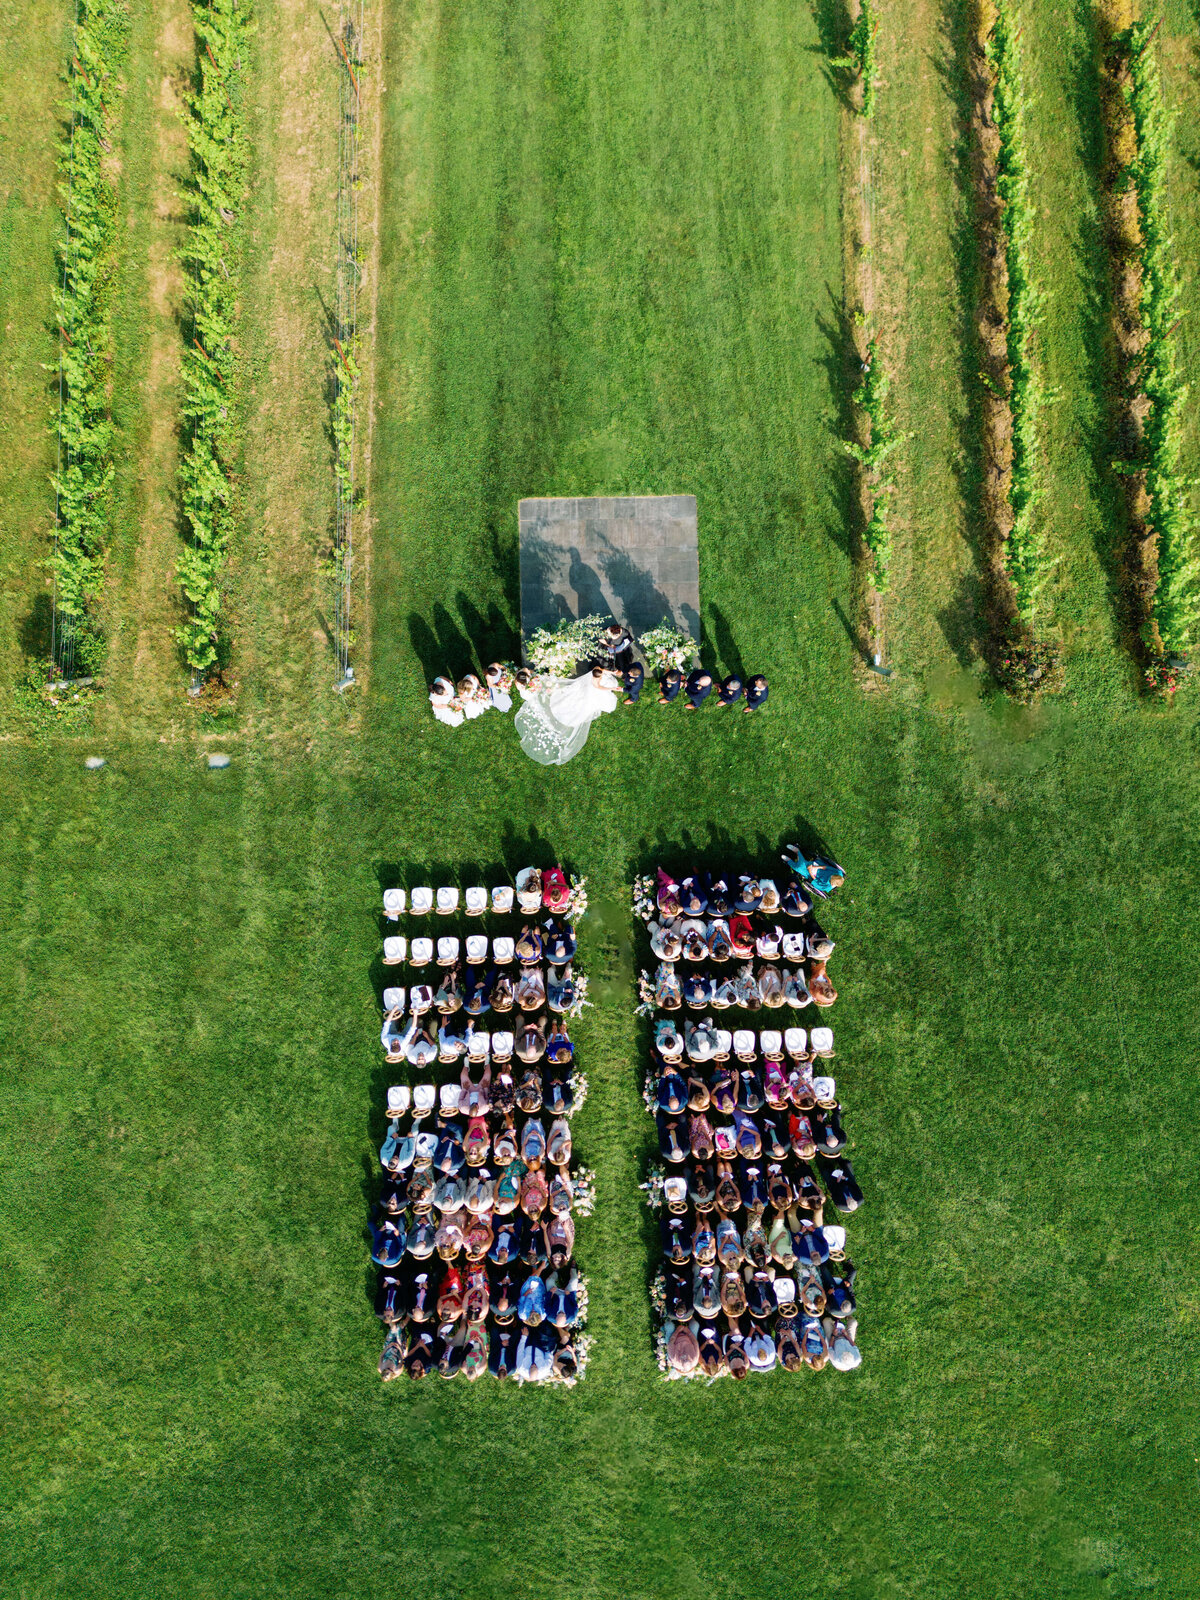 Aerial view of wedding ceremony